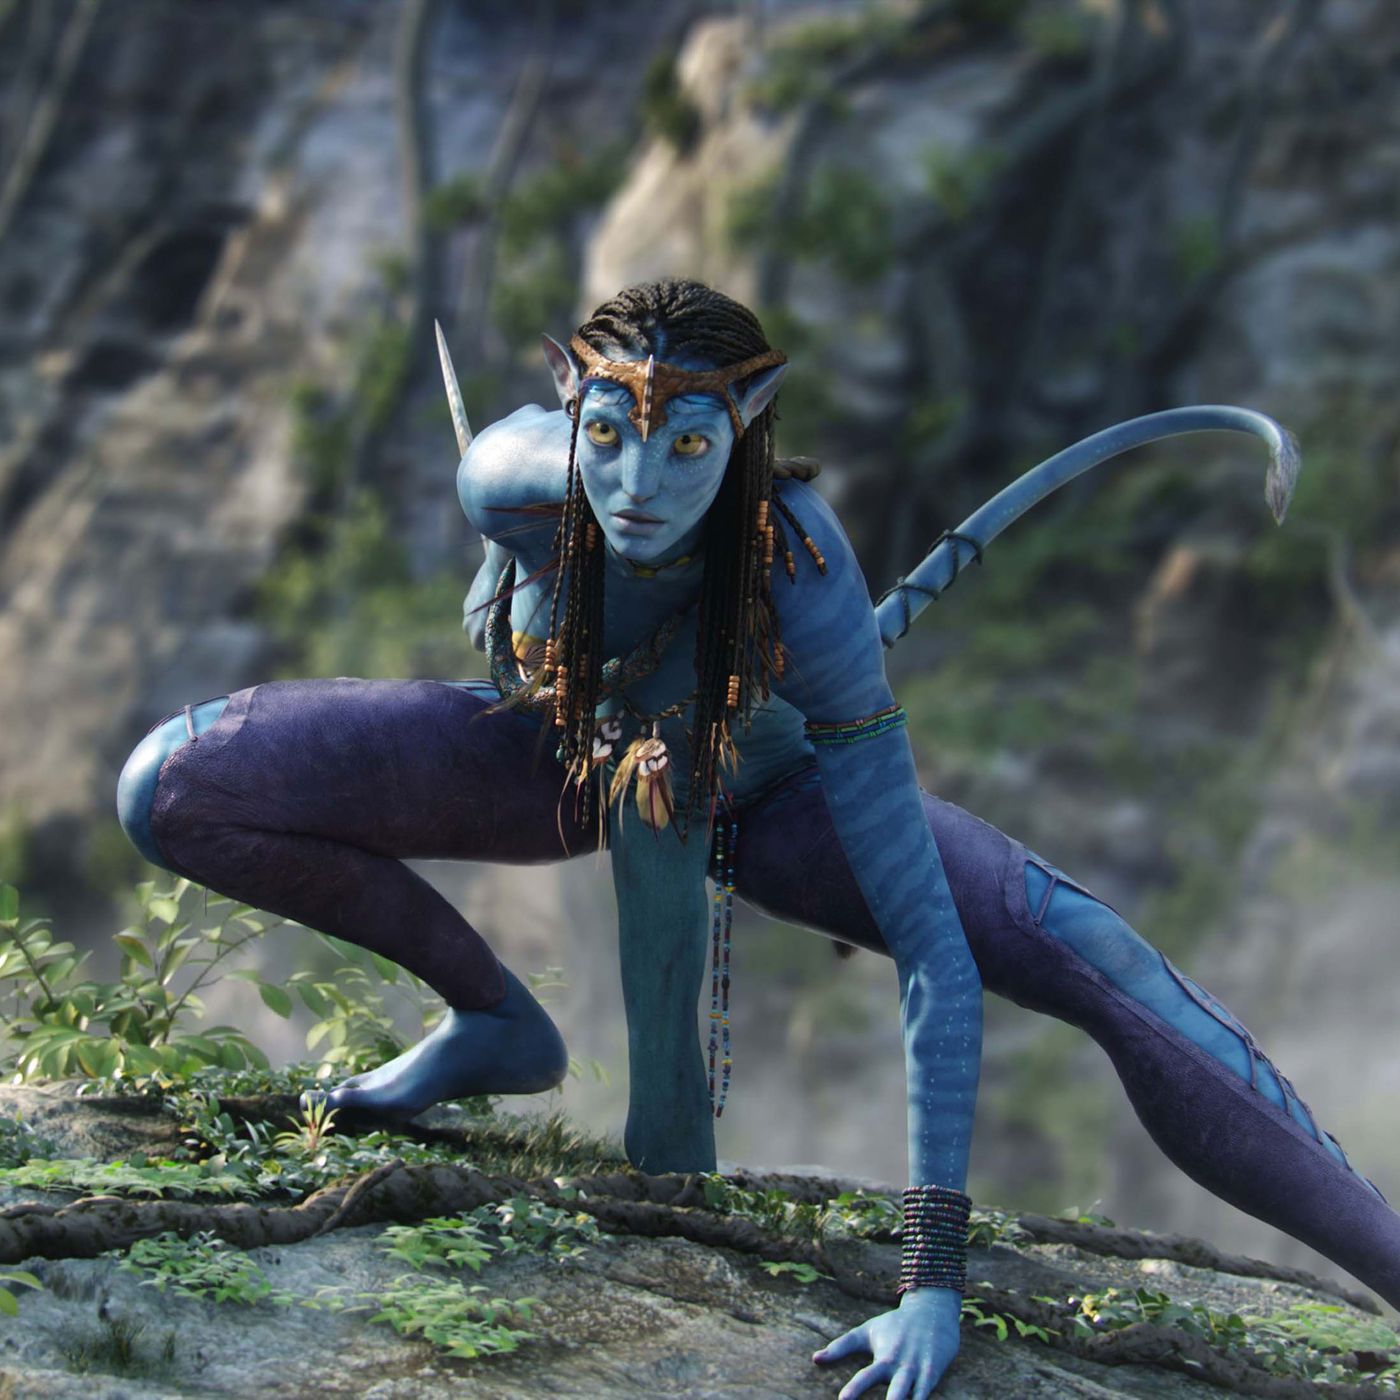 Avatar Story Recap And Ending Explained Things You Should Know Before  Watching Avatar 2  Film Fugitives